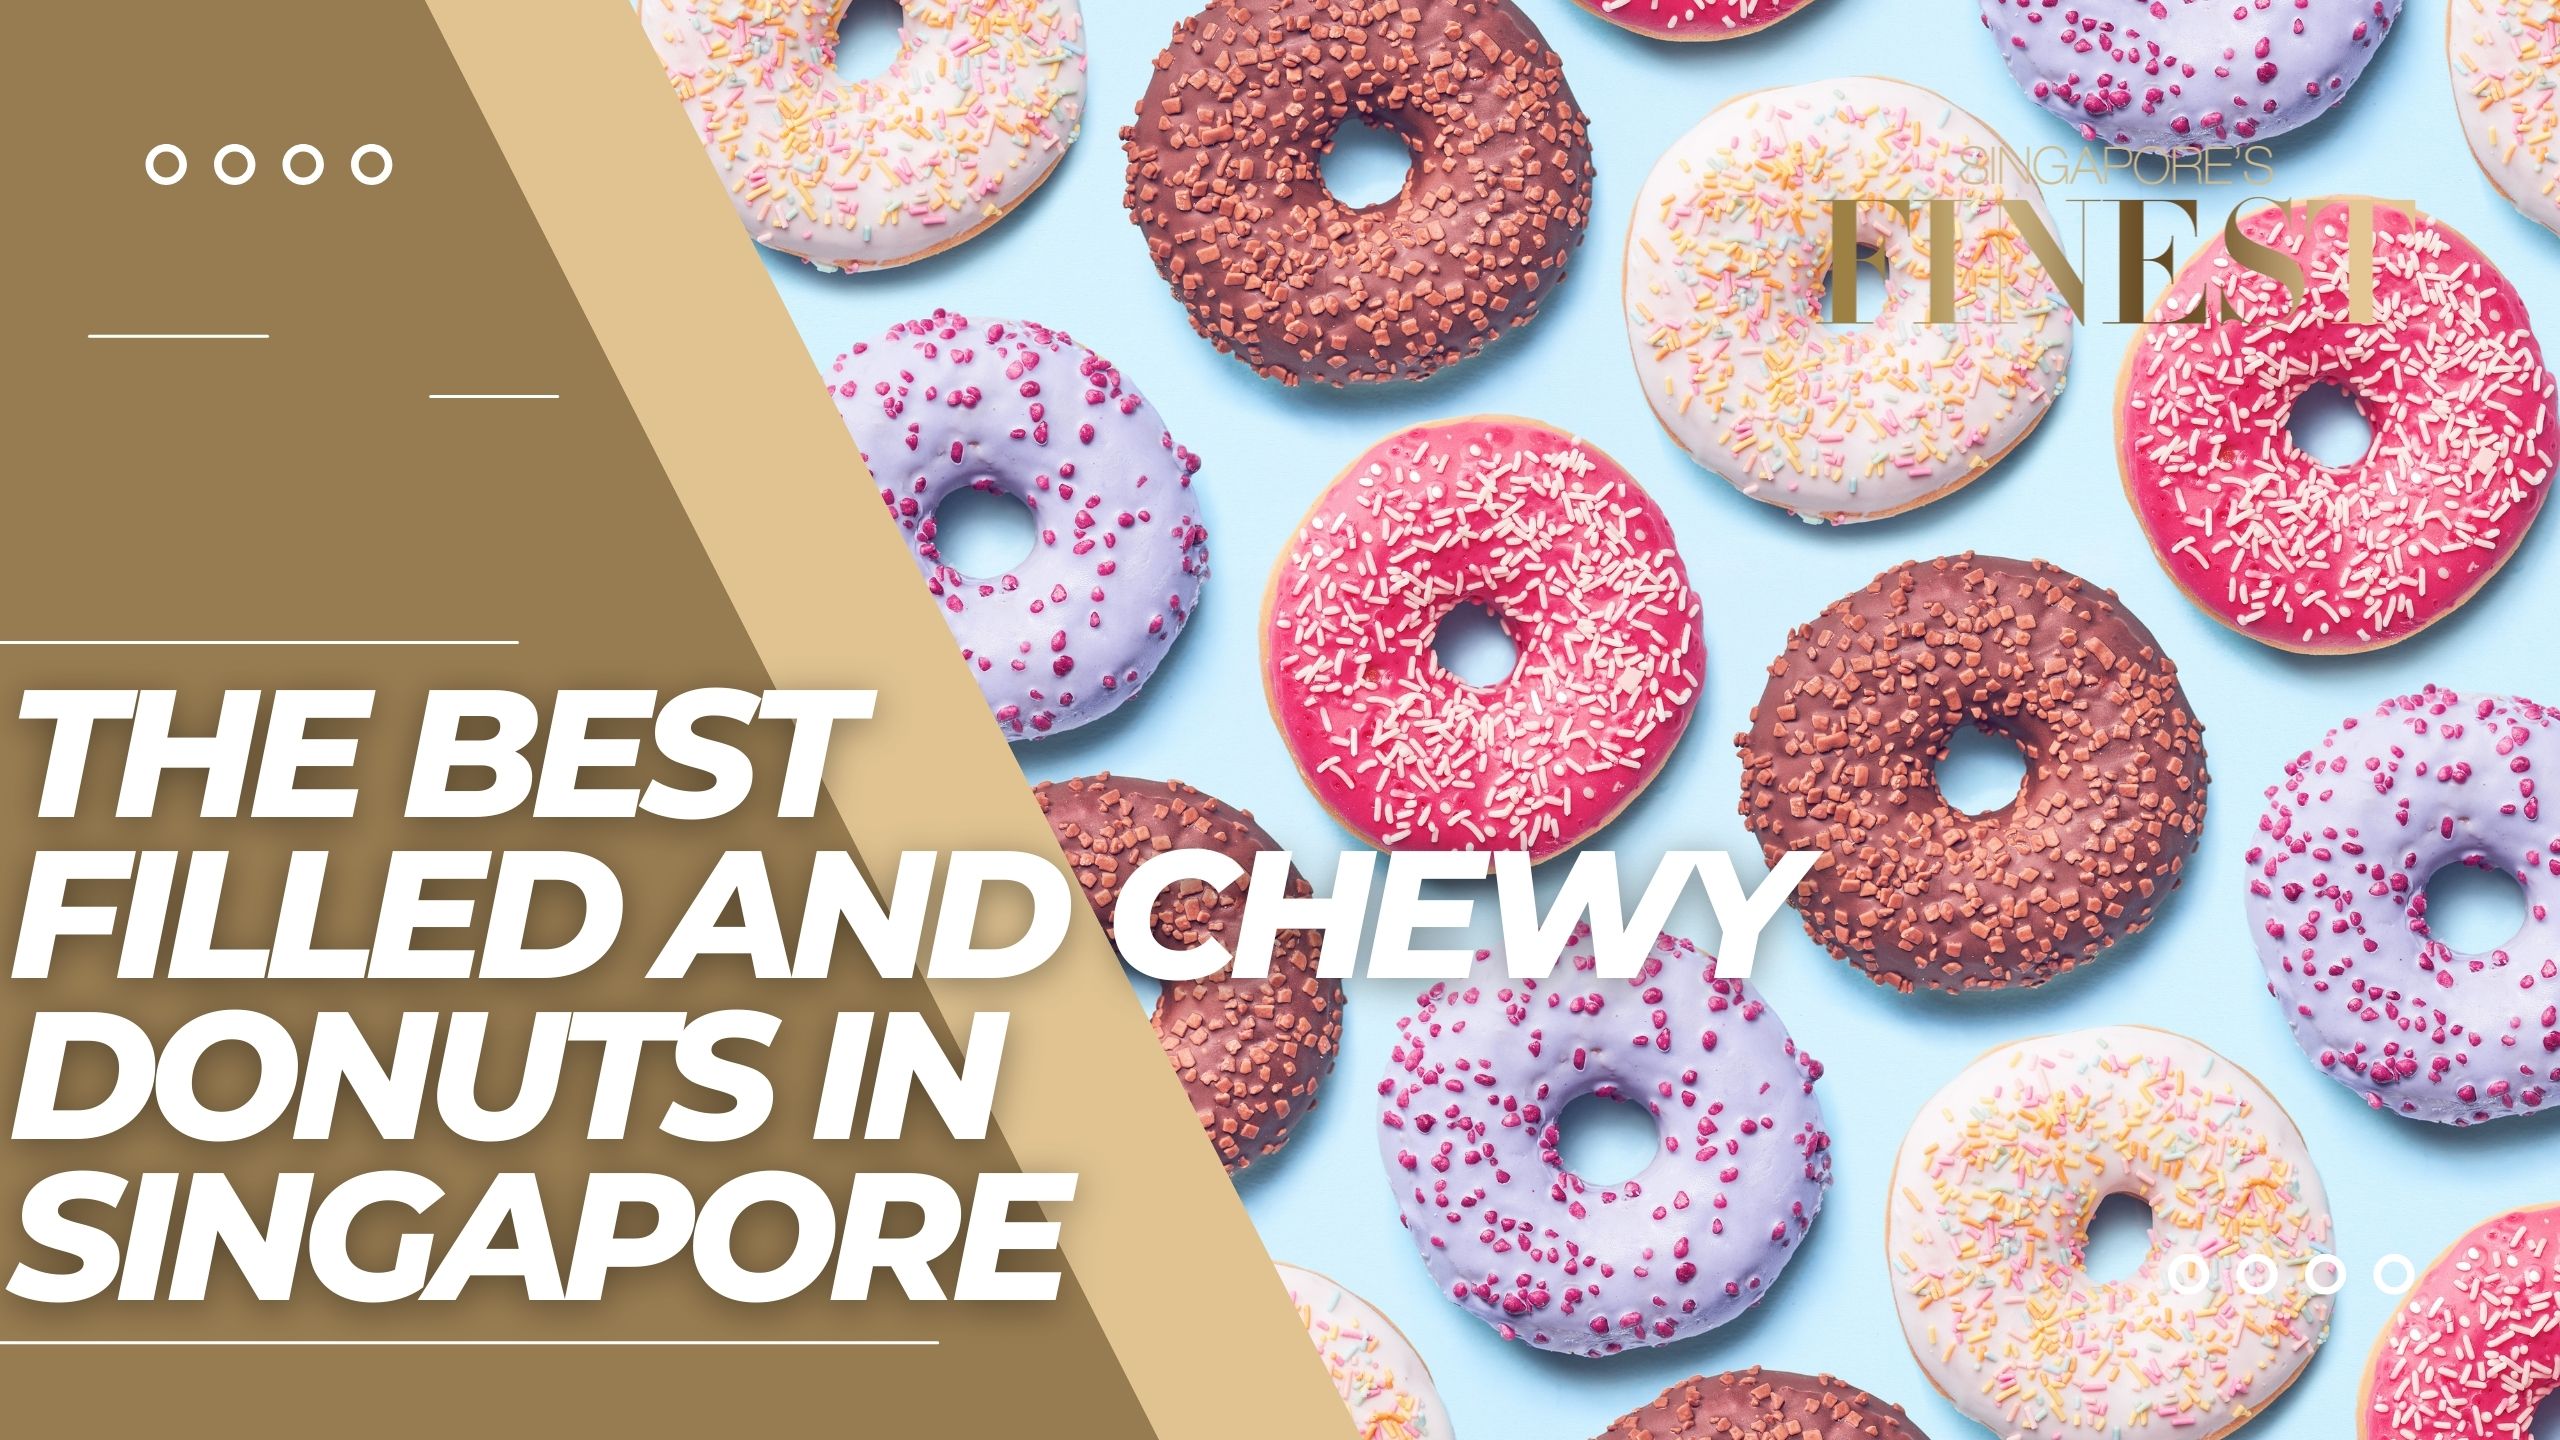 The Finest Filled and Chewy Donuts in Singapore